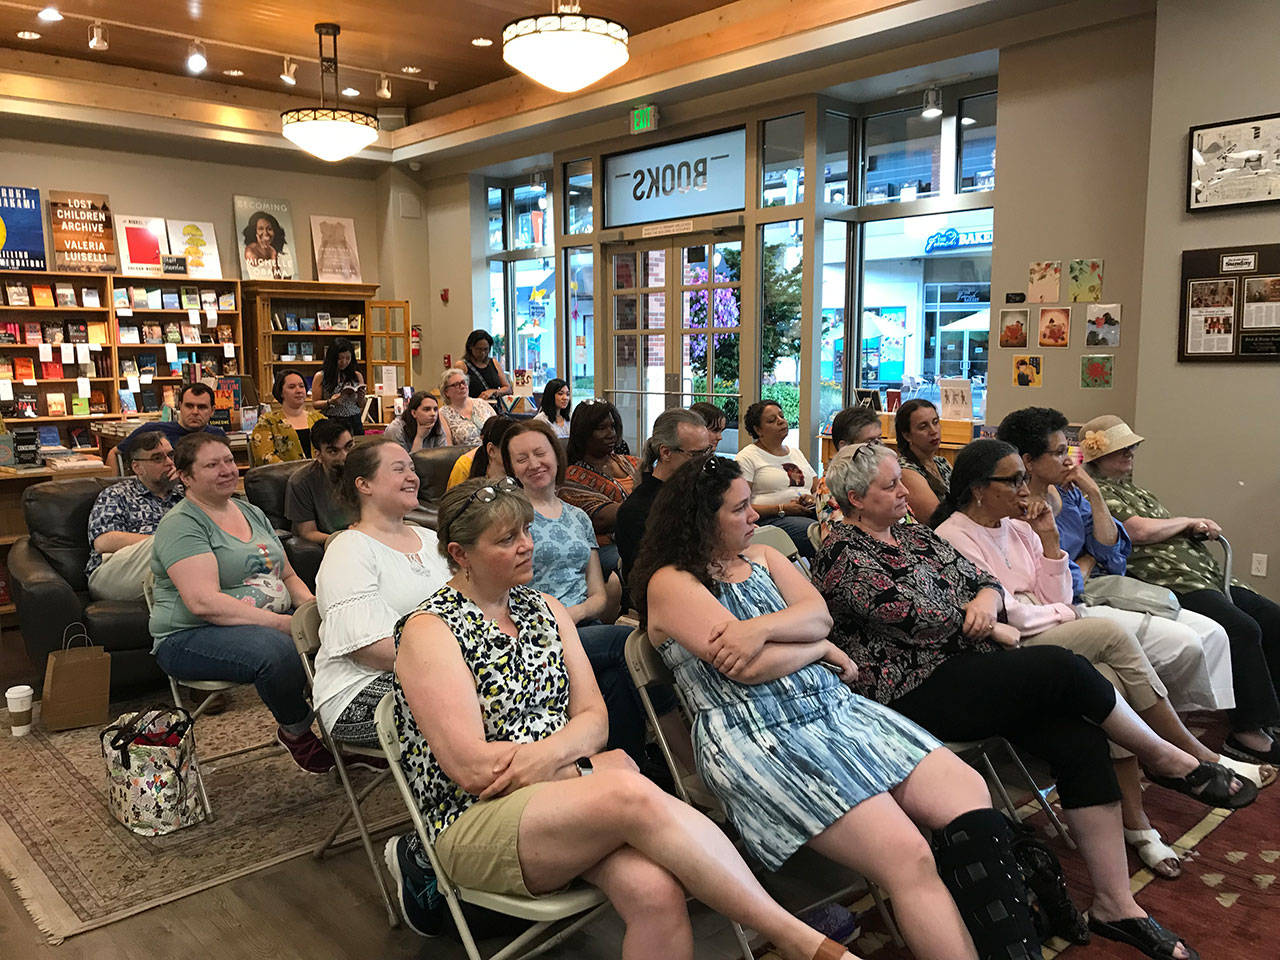 The audience at Brick & Mortar Books in Redmond listens to authors discussing the importance of representation in stories.